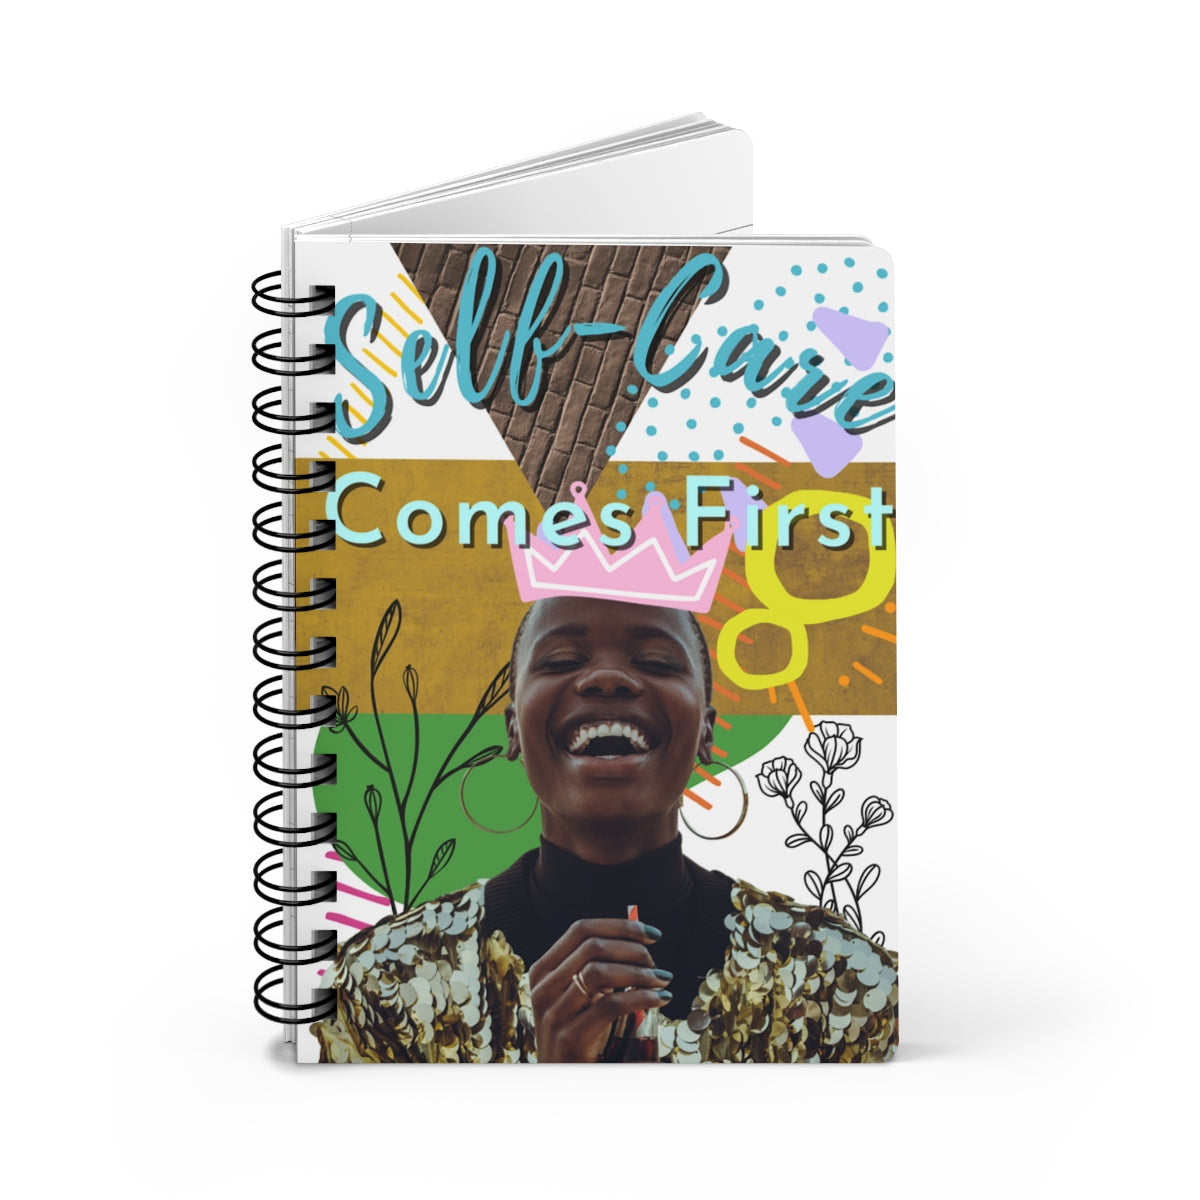 An Eclectic "Self-Care Comes First" Journal for Black Women perfect for documenting your self-care routine and journaling.